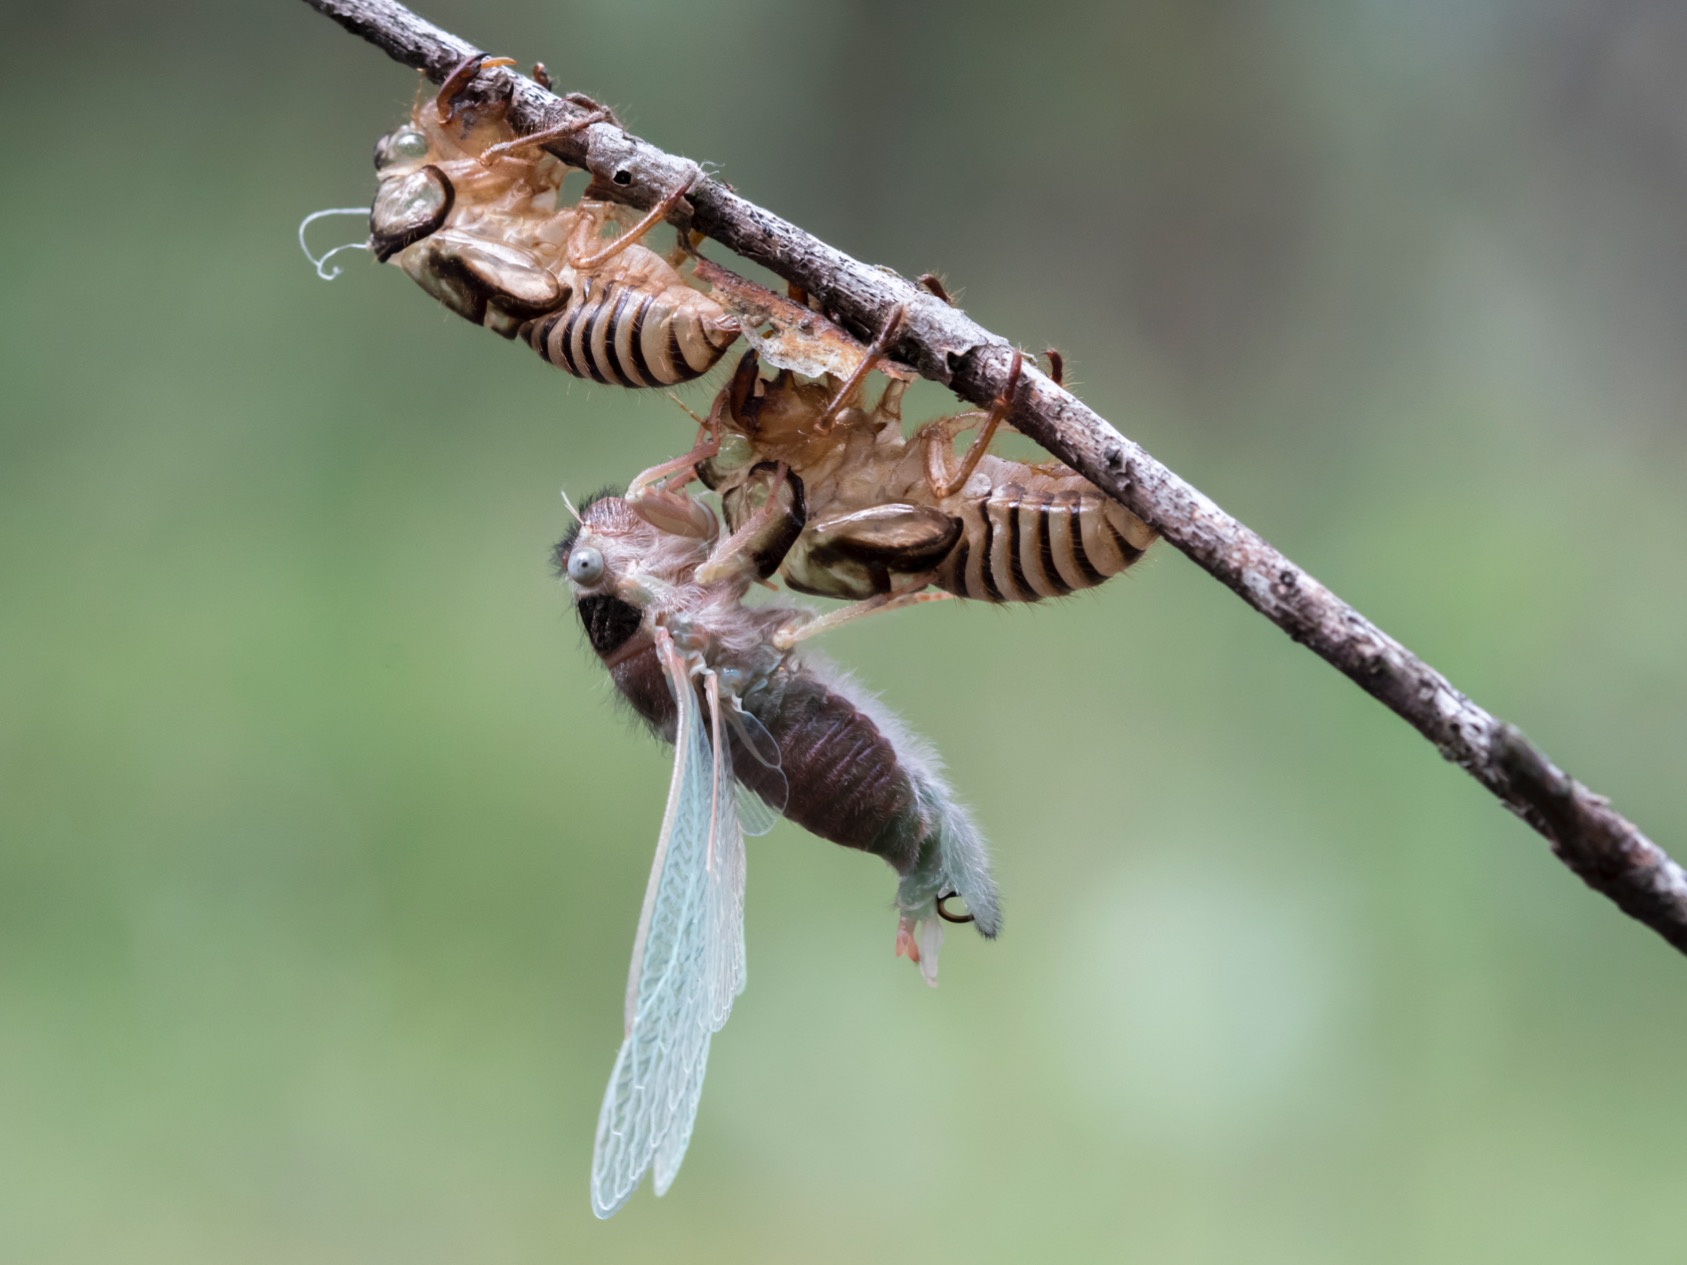 Cicada expanding its wings